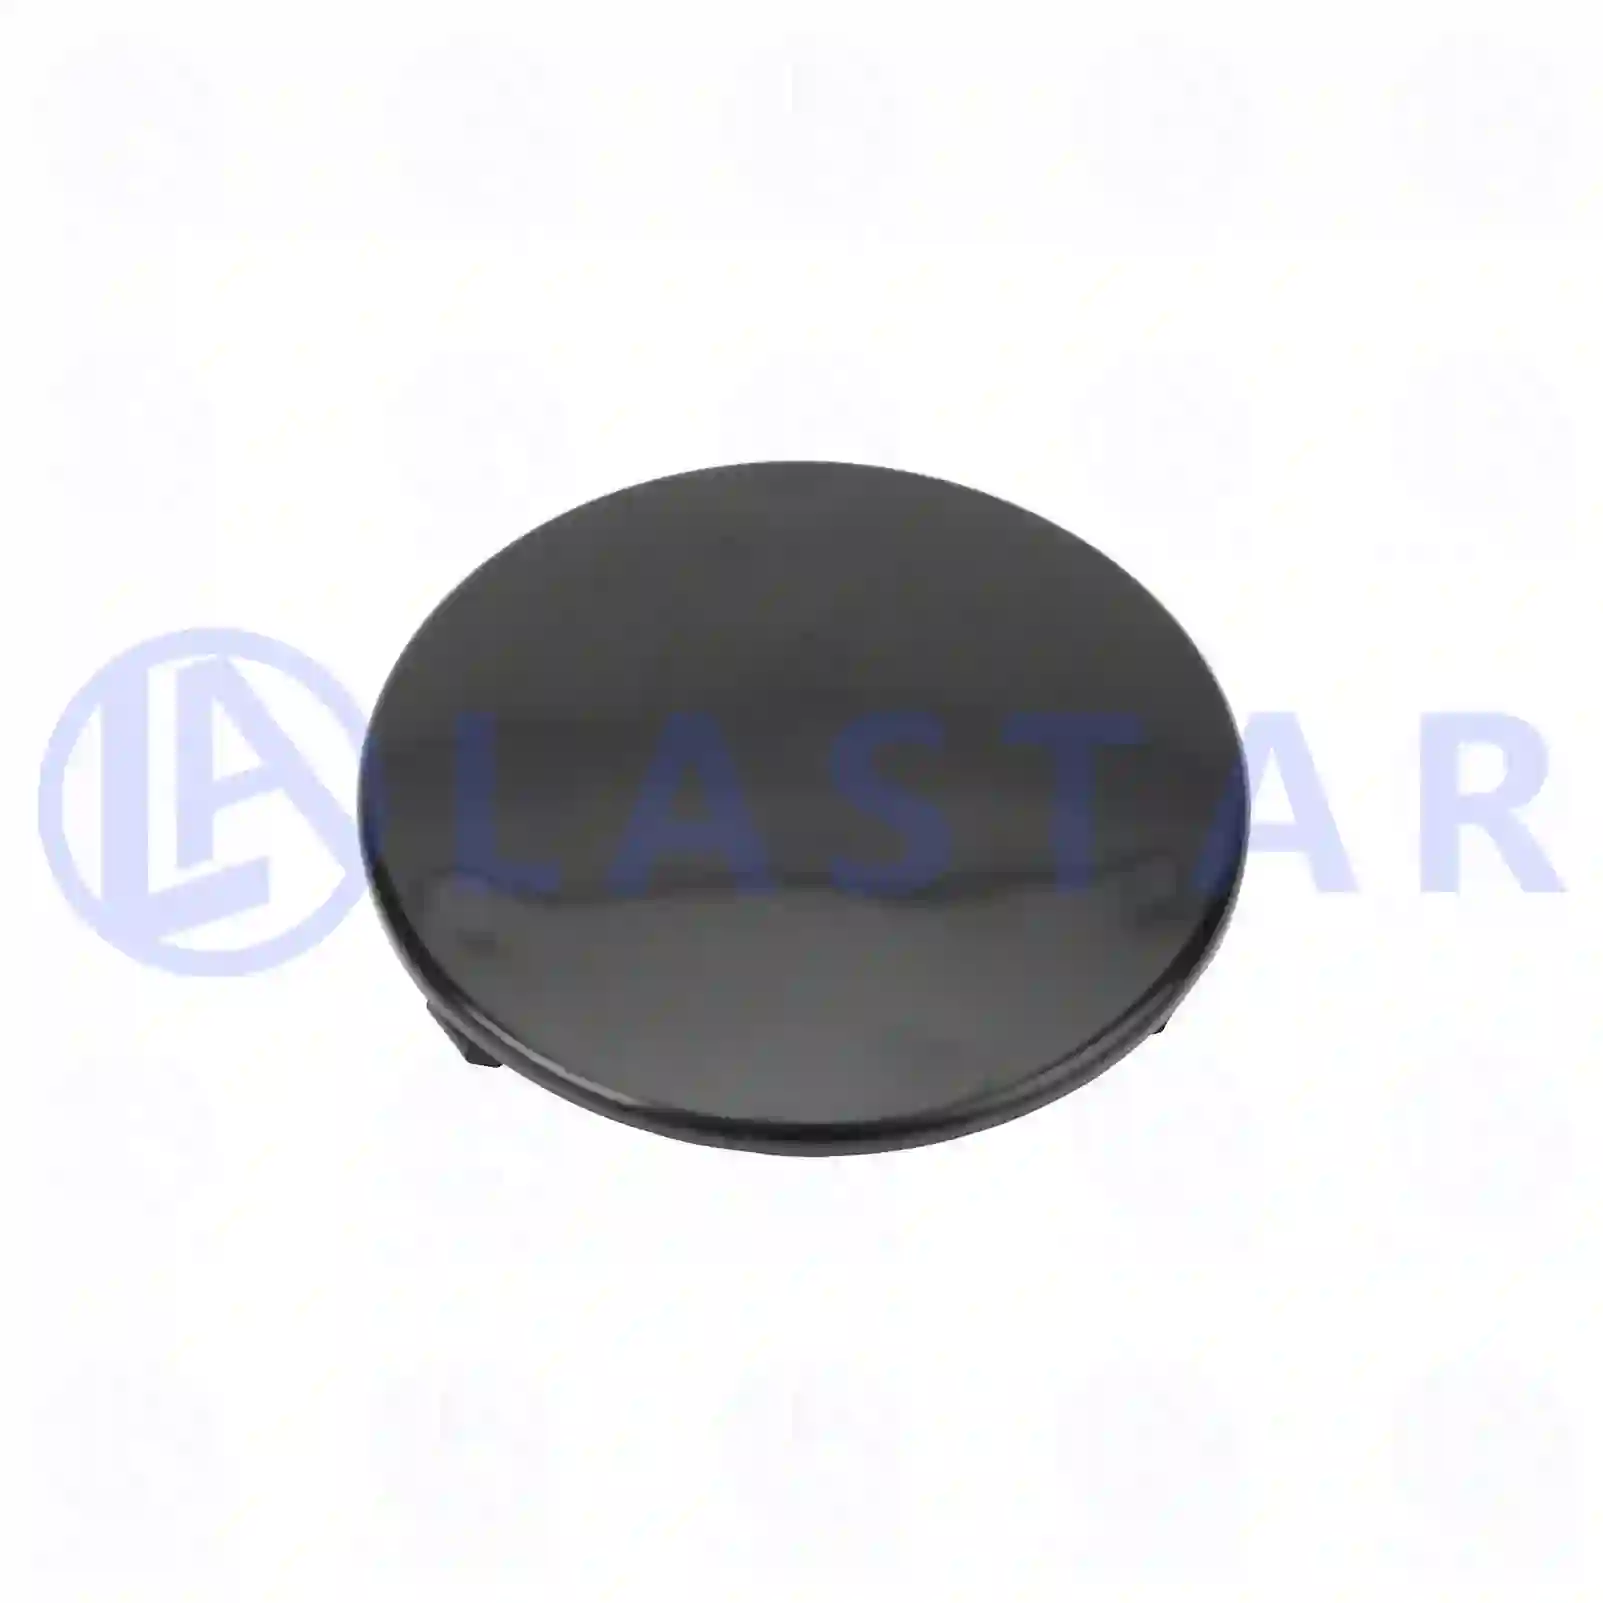 Cover, front grill, 77721083, 20453690, 21425186, ZG60452-0008 ||  77721083 Lastar Spare Part | Truck Spare Parts, Auotomotive Spare Parts Cover, front grill, 77721083, 20453690, 21425186, ZG60452-0008 ||  77721083 Lastar Spare Part | Truck Spare Parts, Auotomotive Spare Parts